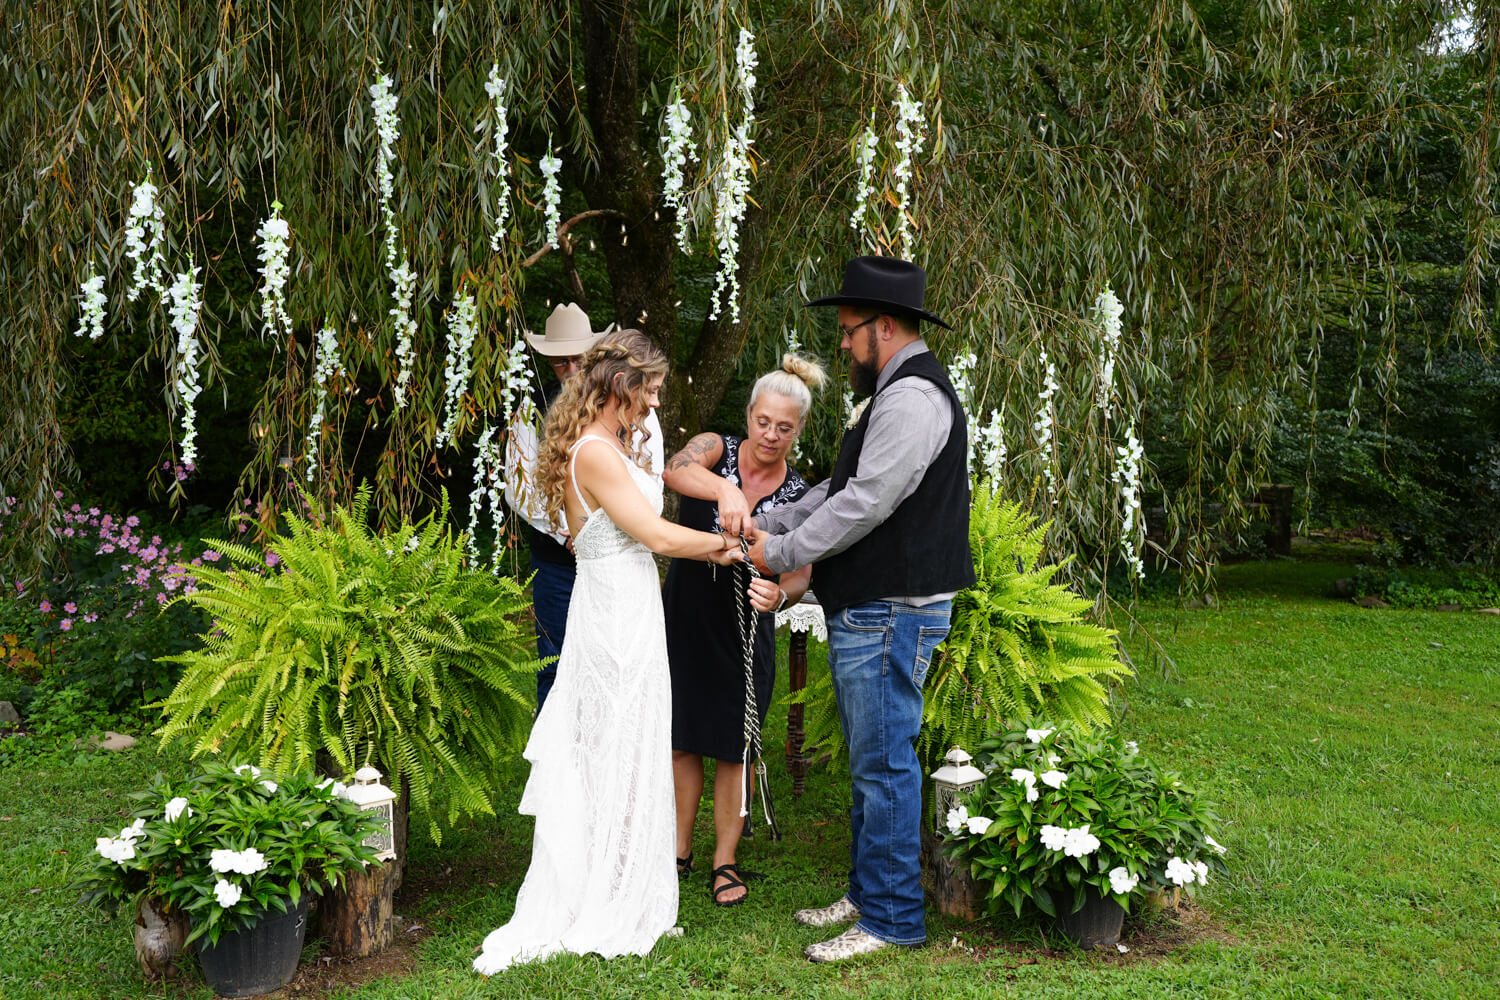 Western style hand fasting ceremony under a willow tree with white wisteria